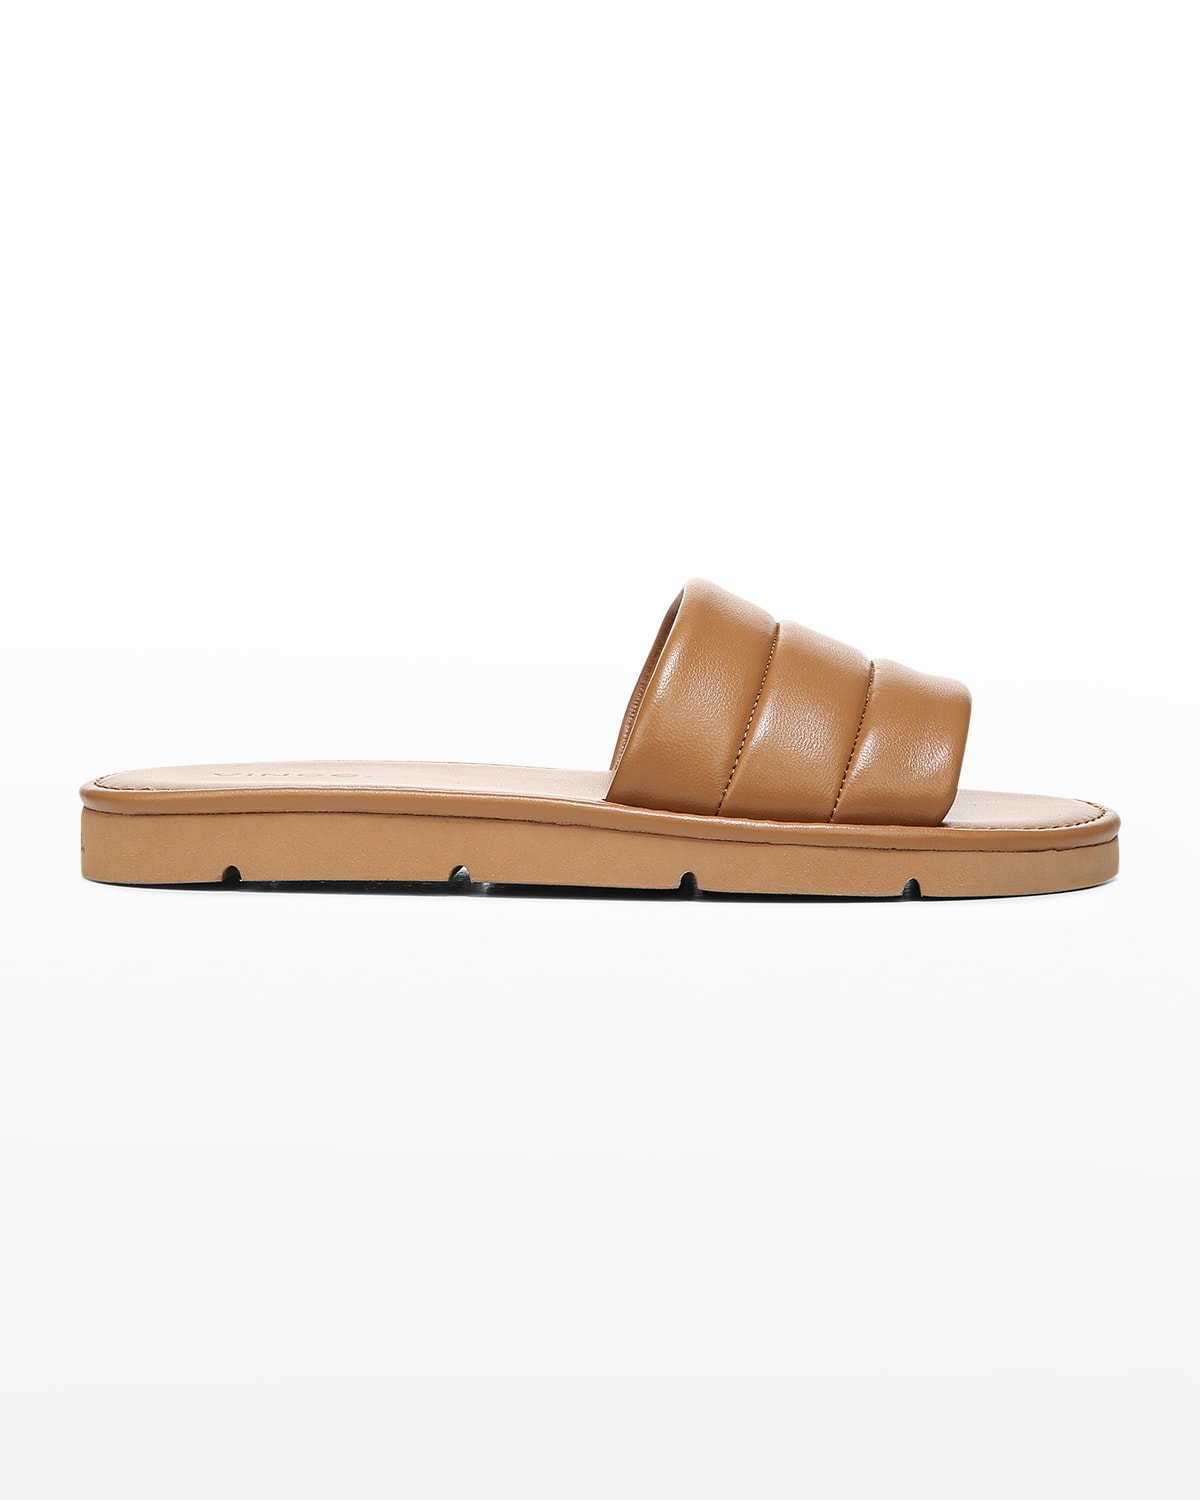 Vince Olina Padded Leather Flat Sandals, Tan